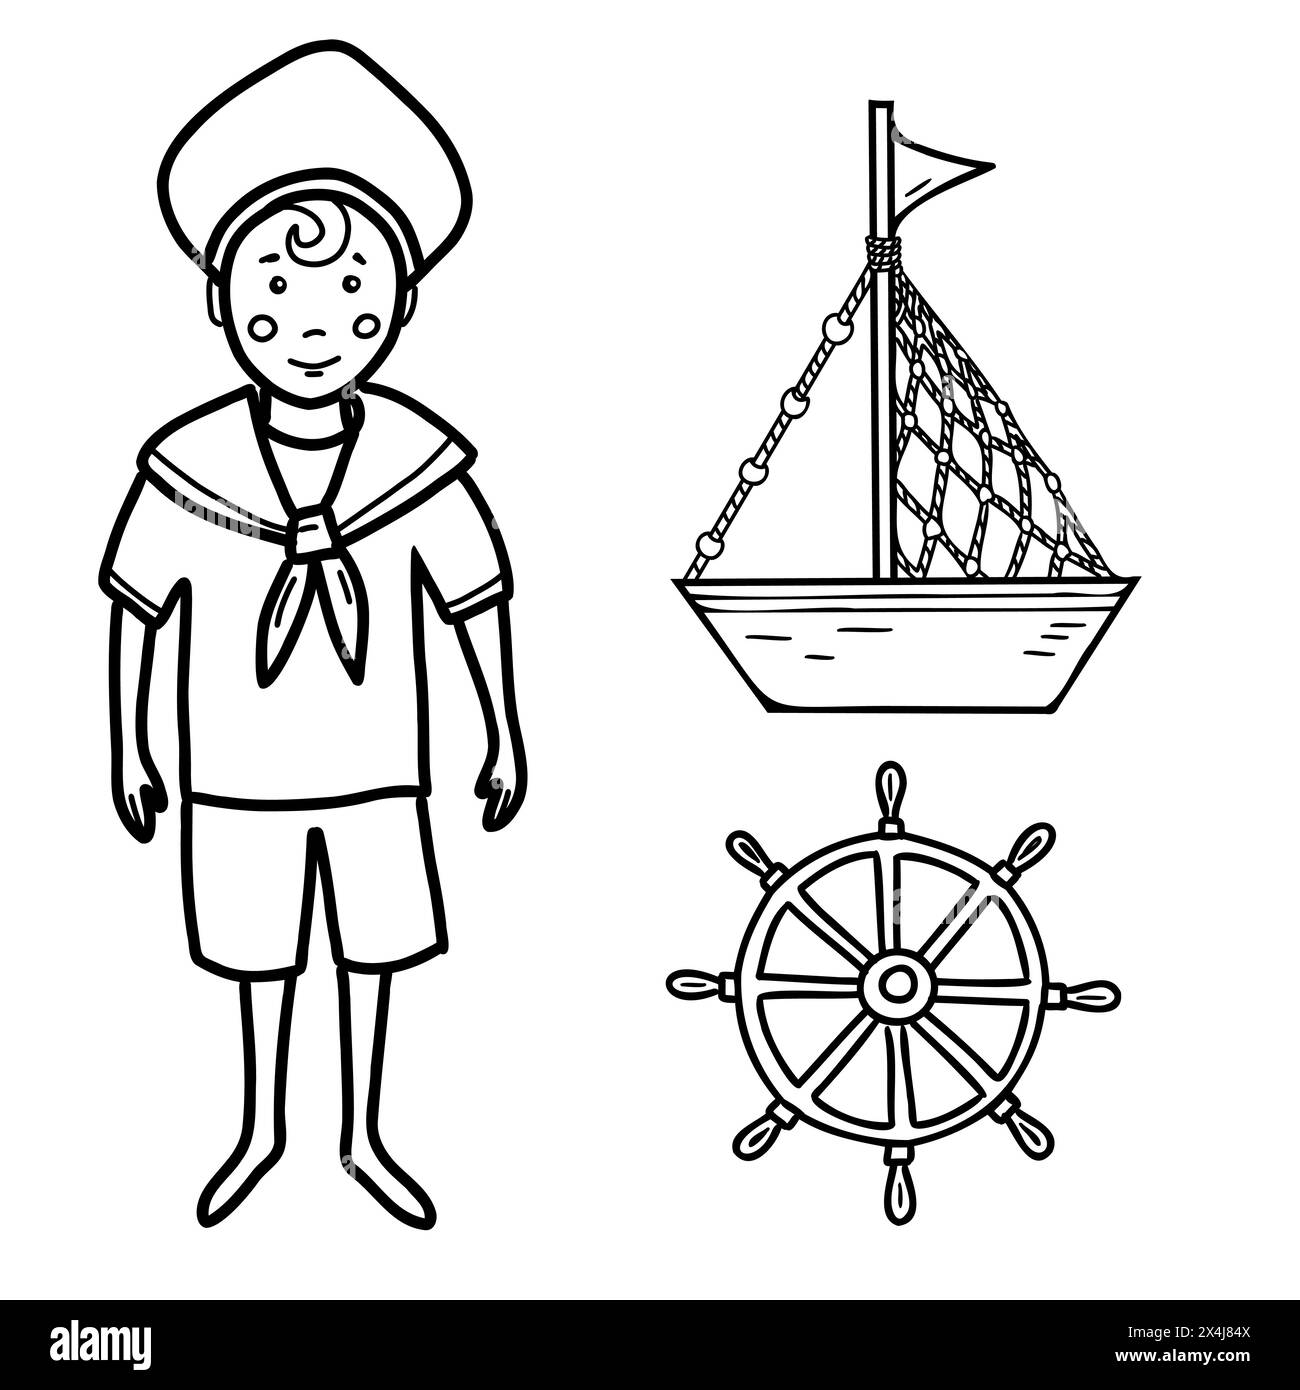 Marine set of little sailor boy, cute ship, boat and steering wheel illustration in doodle style isolated. Stock Vector